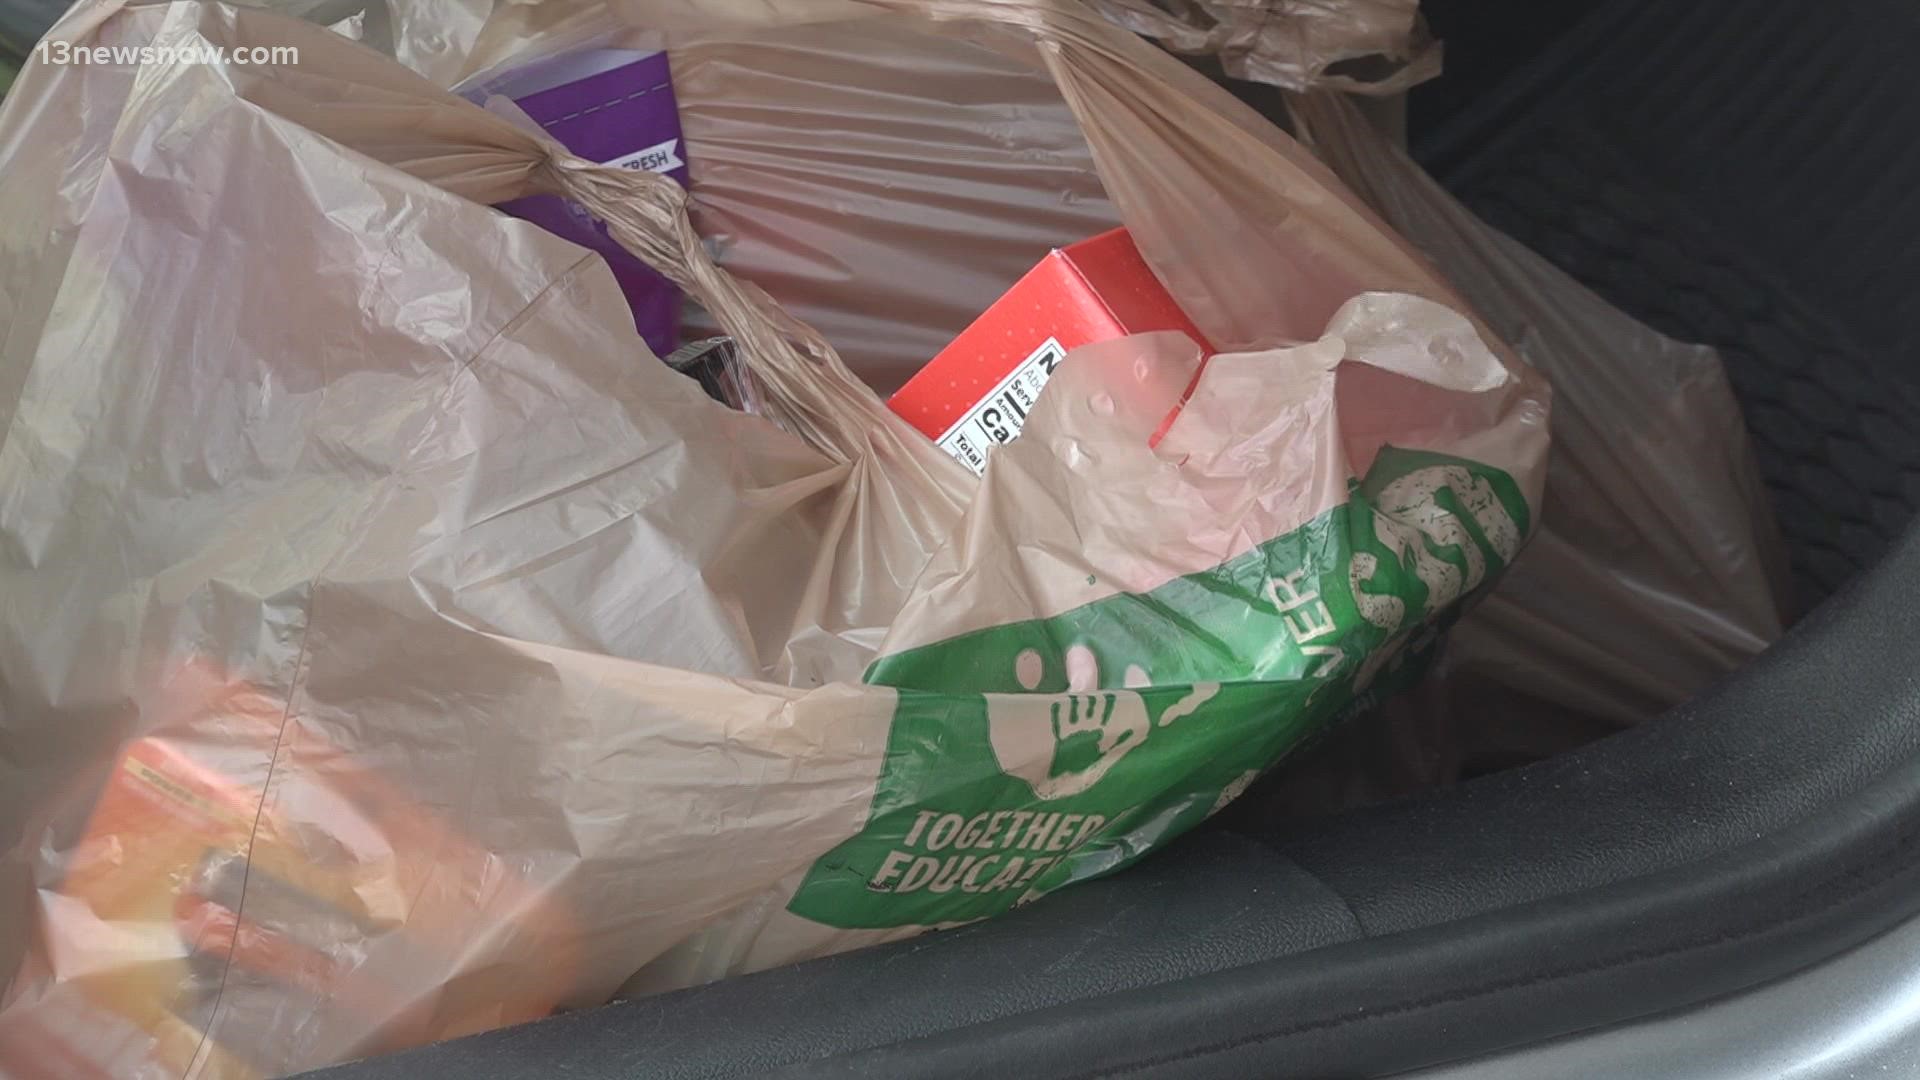 Virginia Beach city council members are kickstarting conversations on a possible tax of five cents per disposable plastic bag.